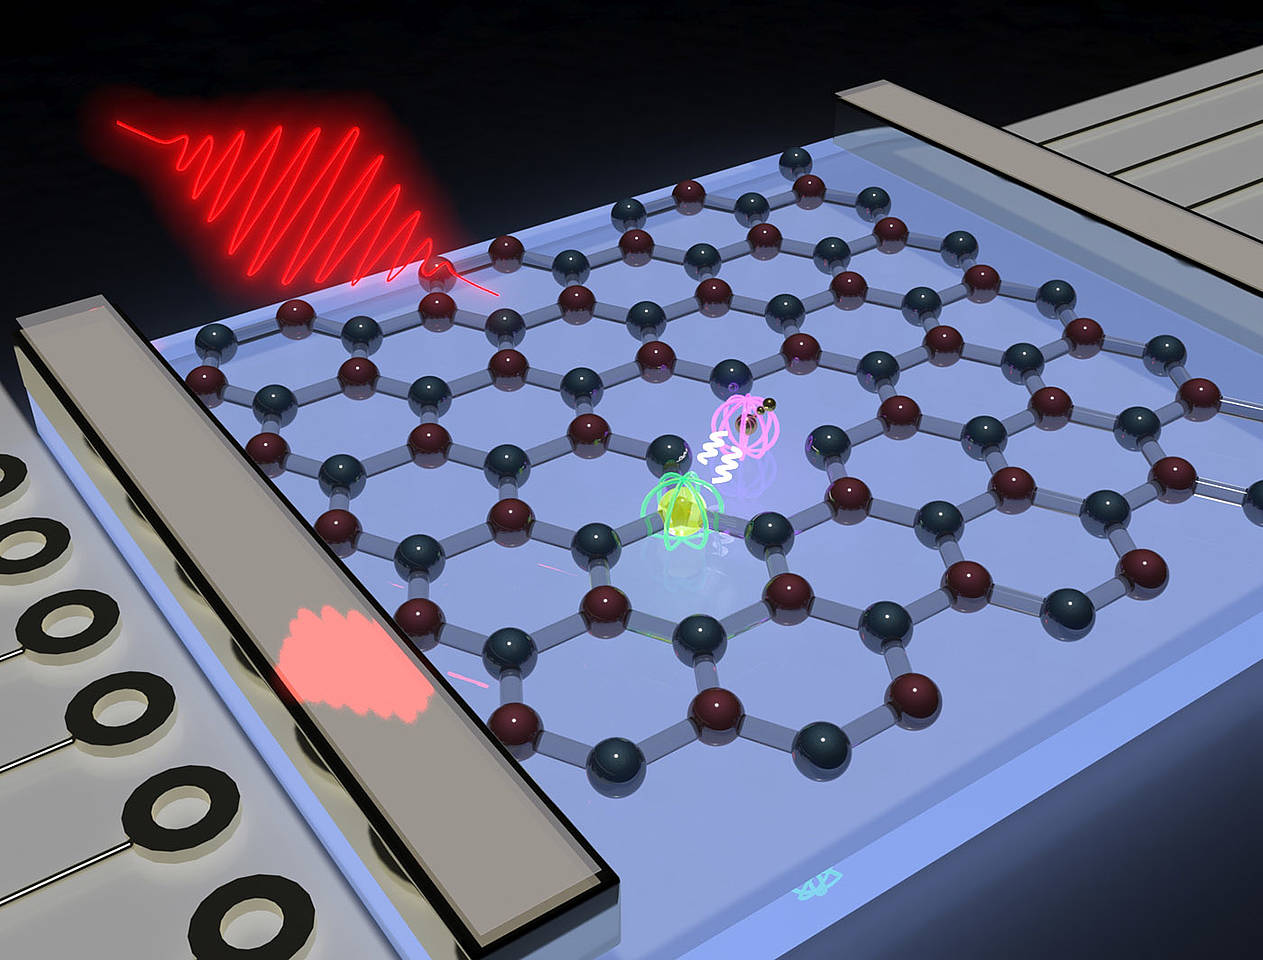 Atomic thin layer of boron nitride with a spin center formed by the boron vacancy